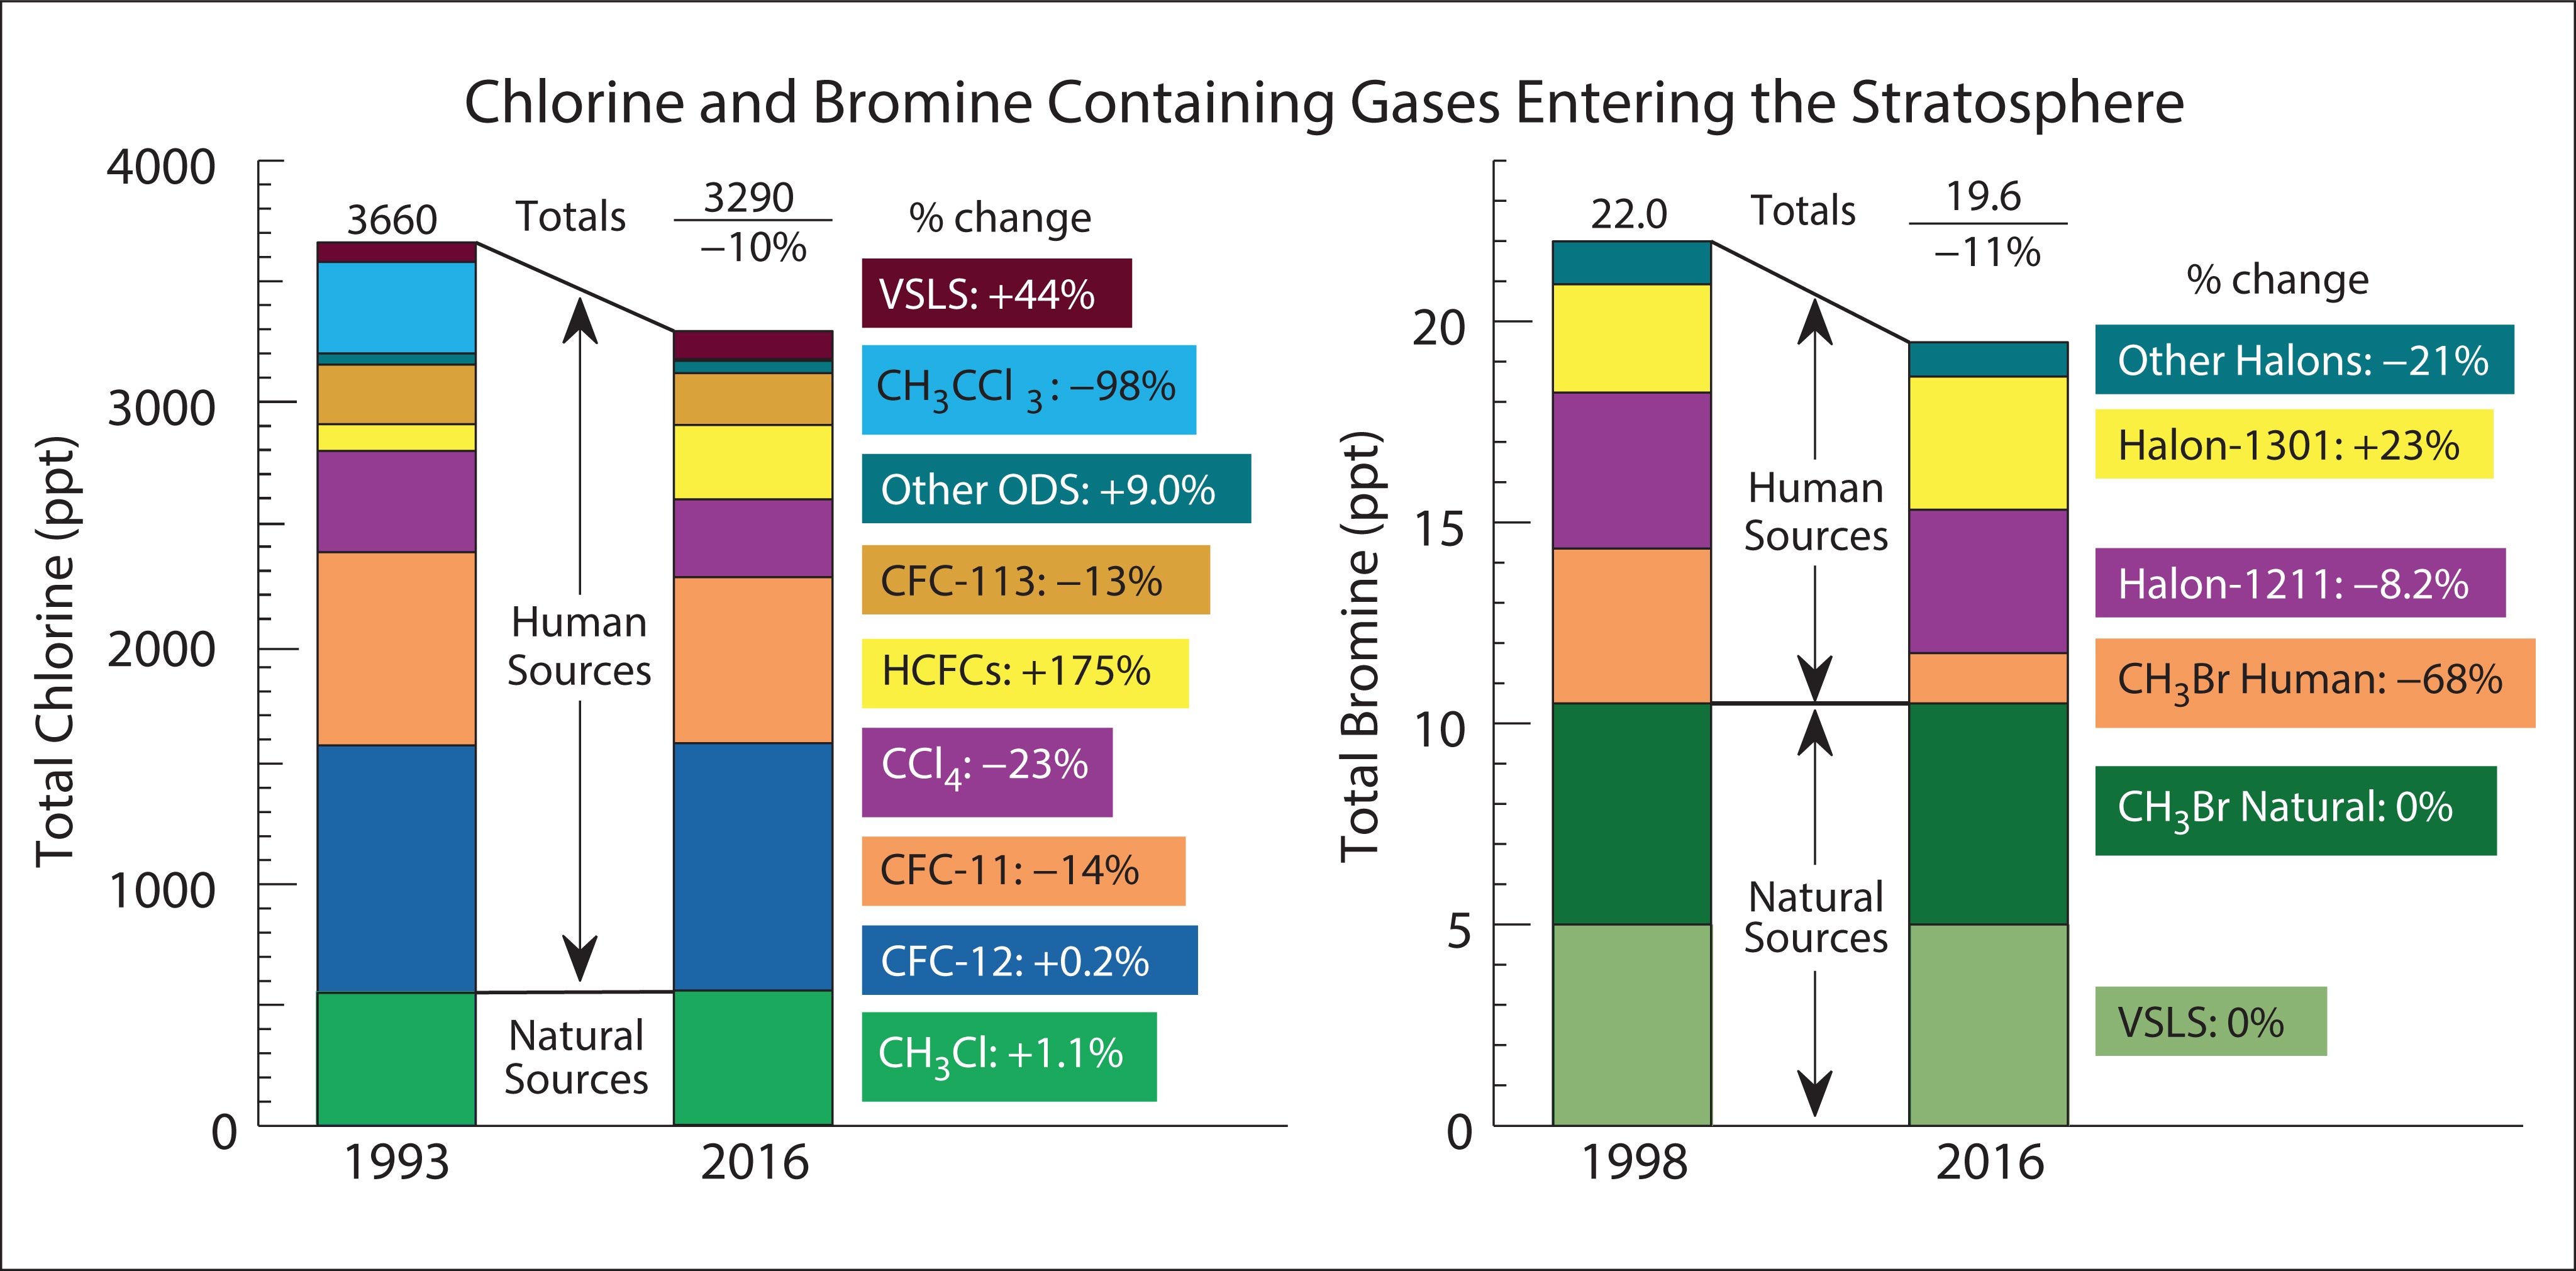 Chlorine and Bromine Containing Gases Entering the Stratosphere